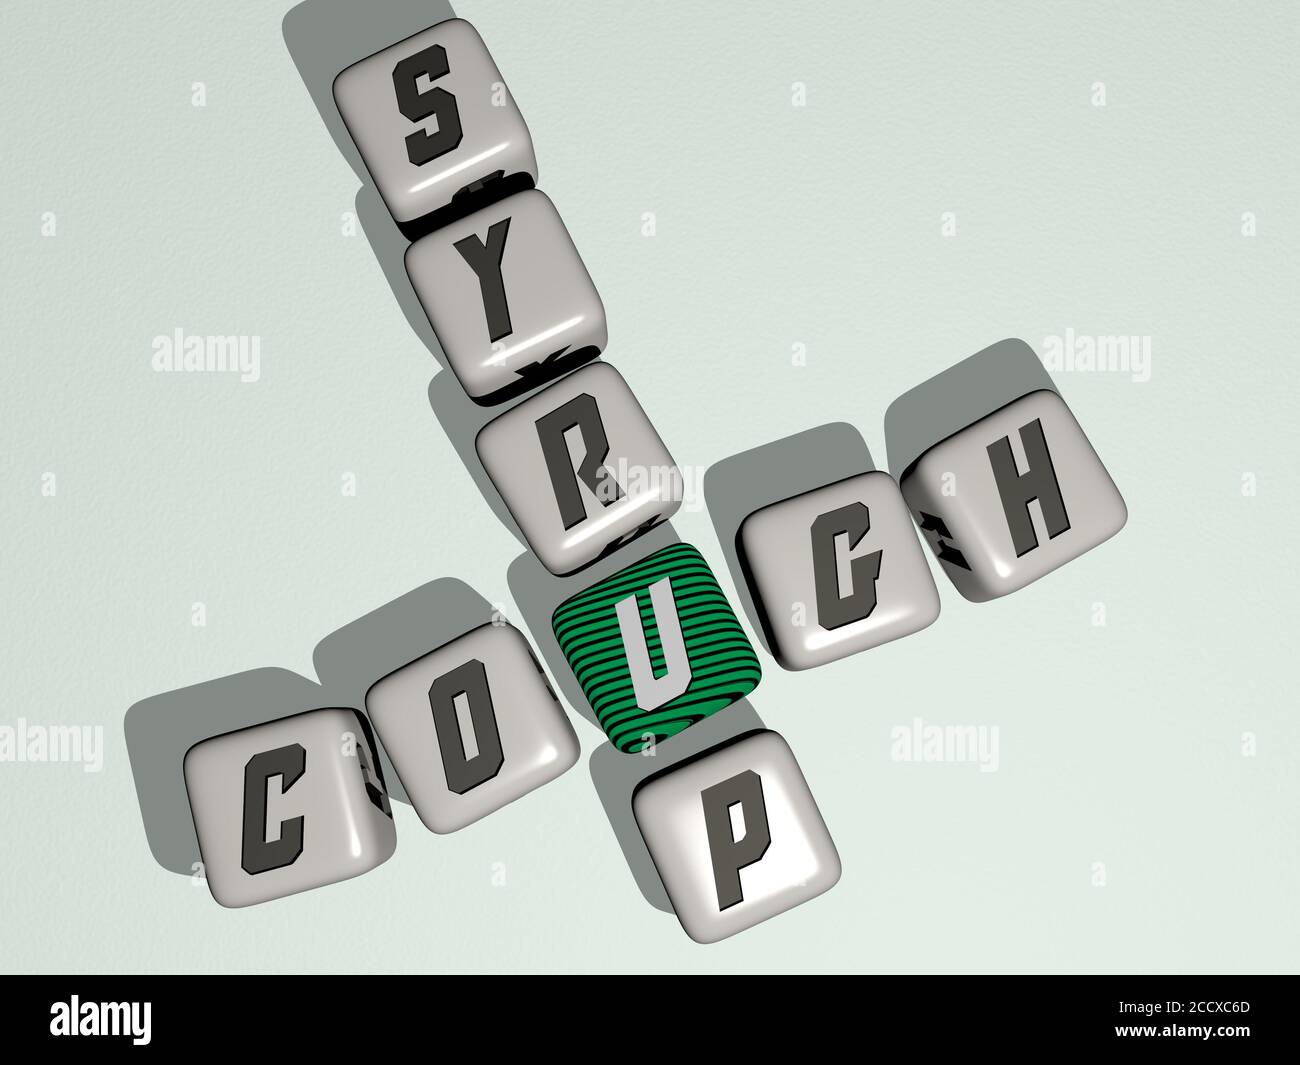 cough syrup crossword by cubic dice letters 3D illustration Stock